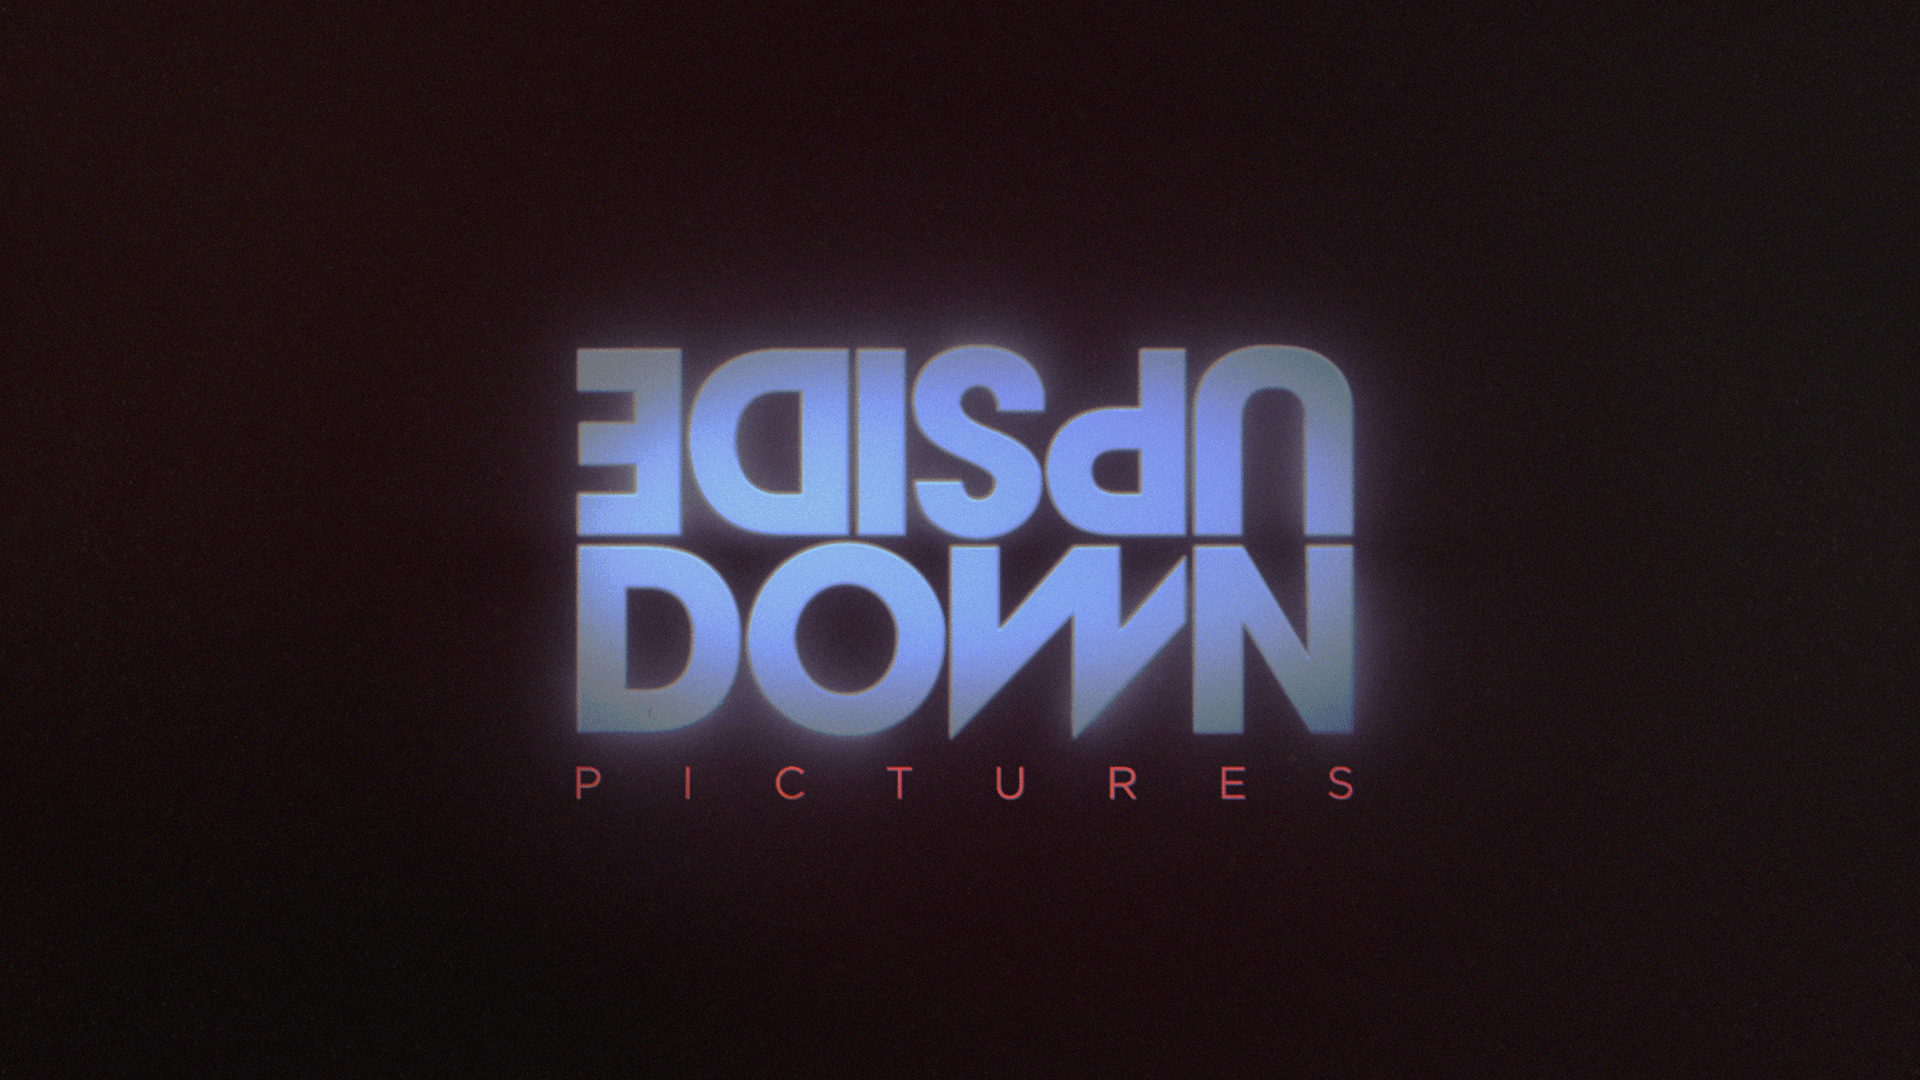 UPSIDE DOWN PICTURES logo